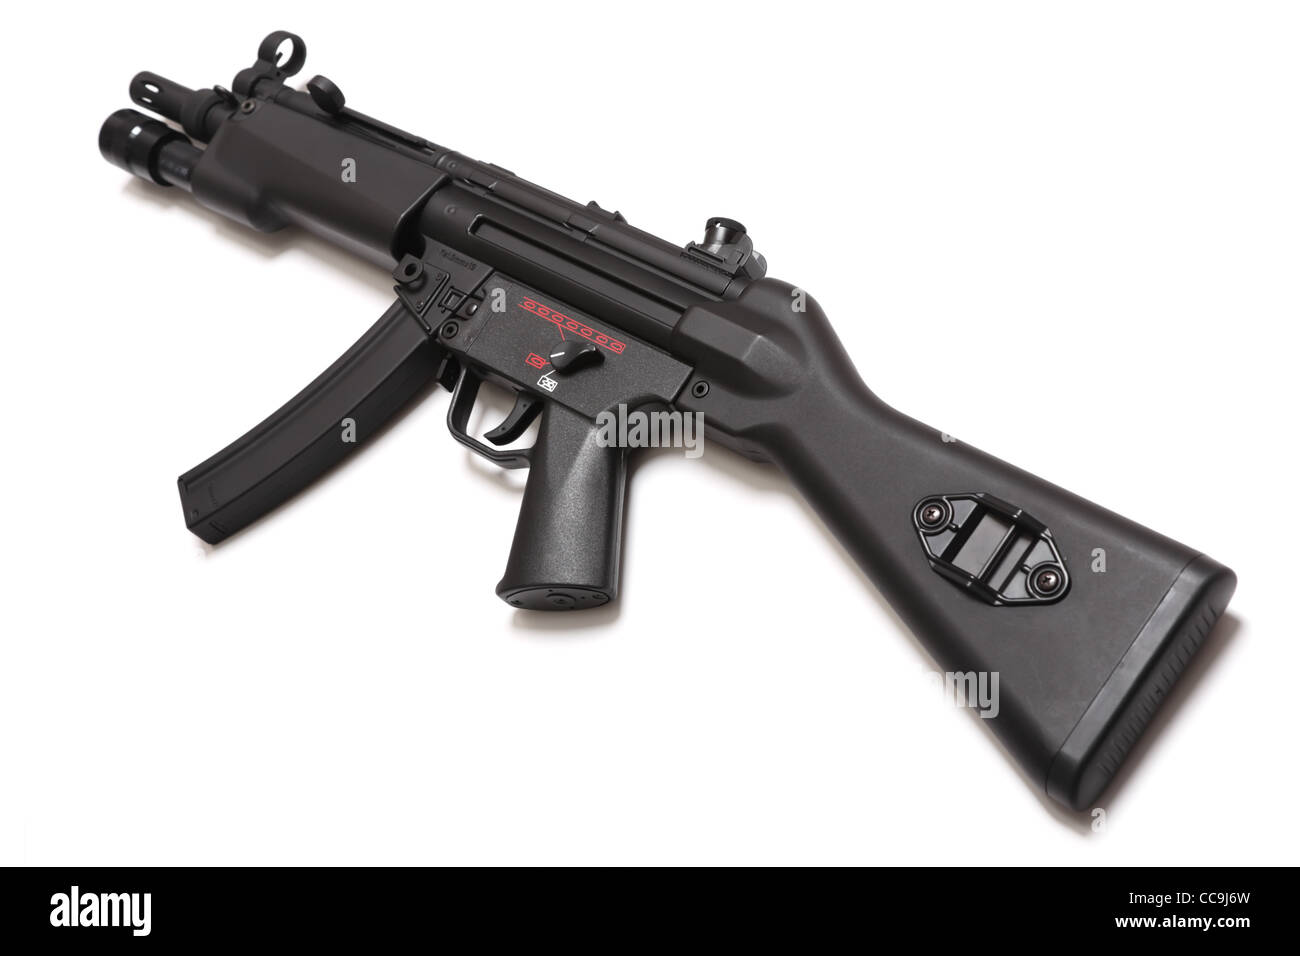 HK MP5 - legendary submachine gun with tactical flashligt. Tilt view. Isolated on a white background. Weapon series. Stock Photo